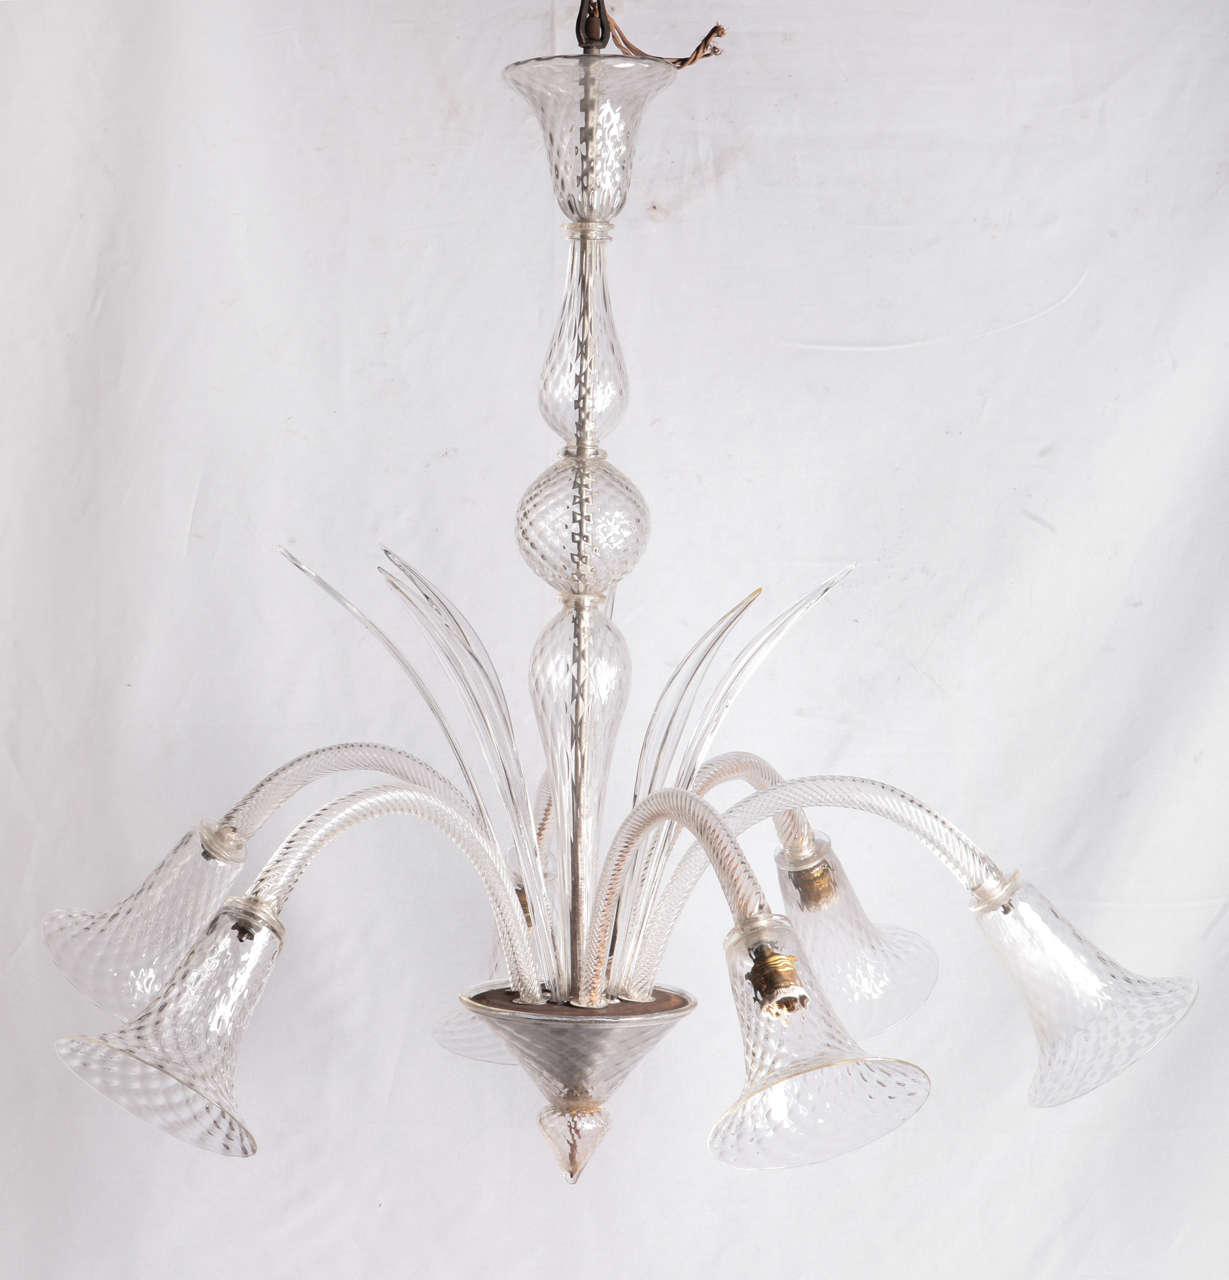 Decorated Murano glass pendant with leaves and six bell jars 1930's .